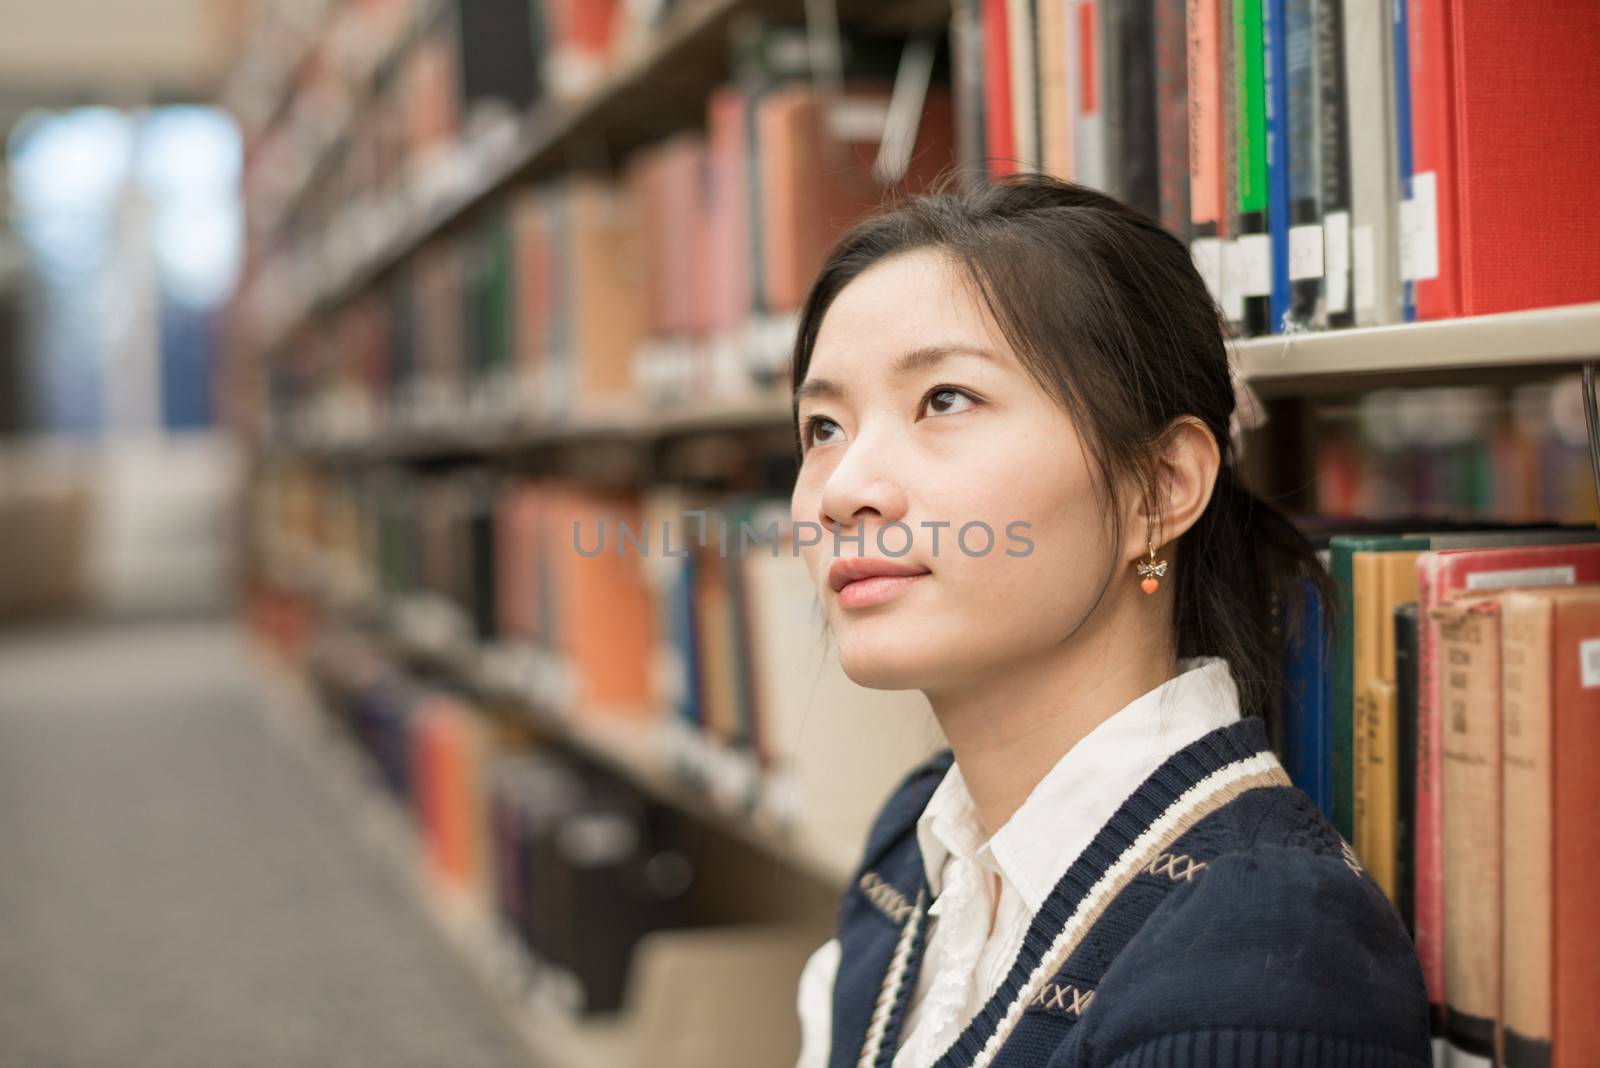 Emotional young woman sitting on the floor in next to a bookshelf in library